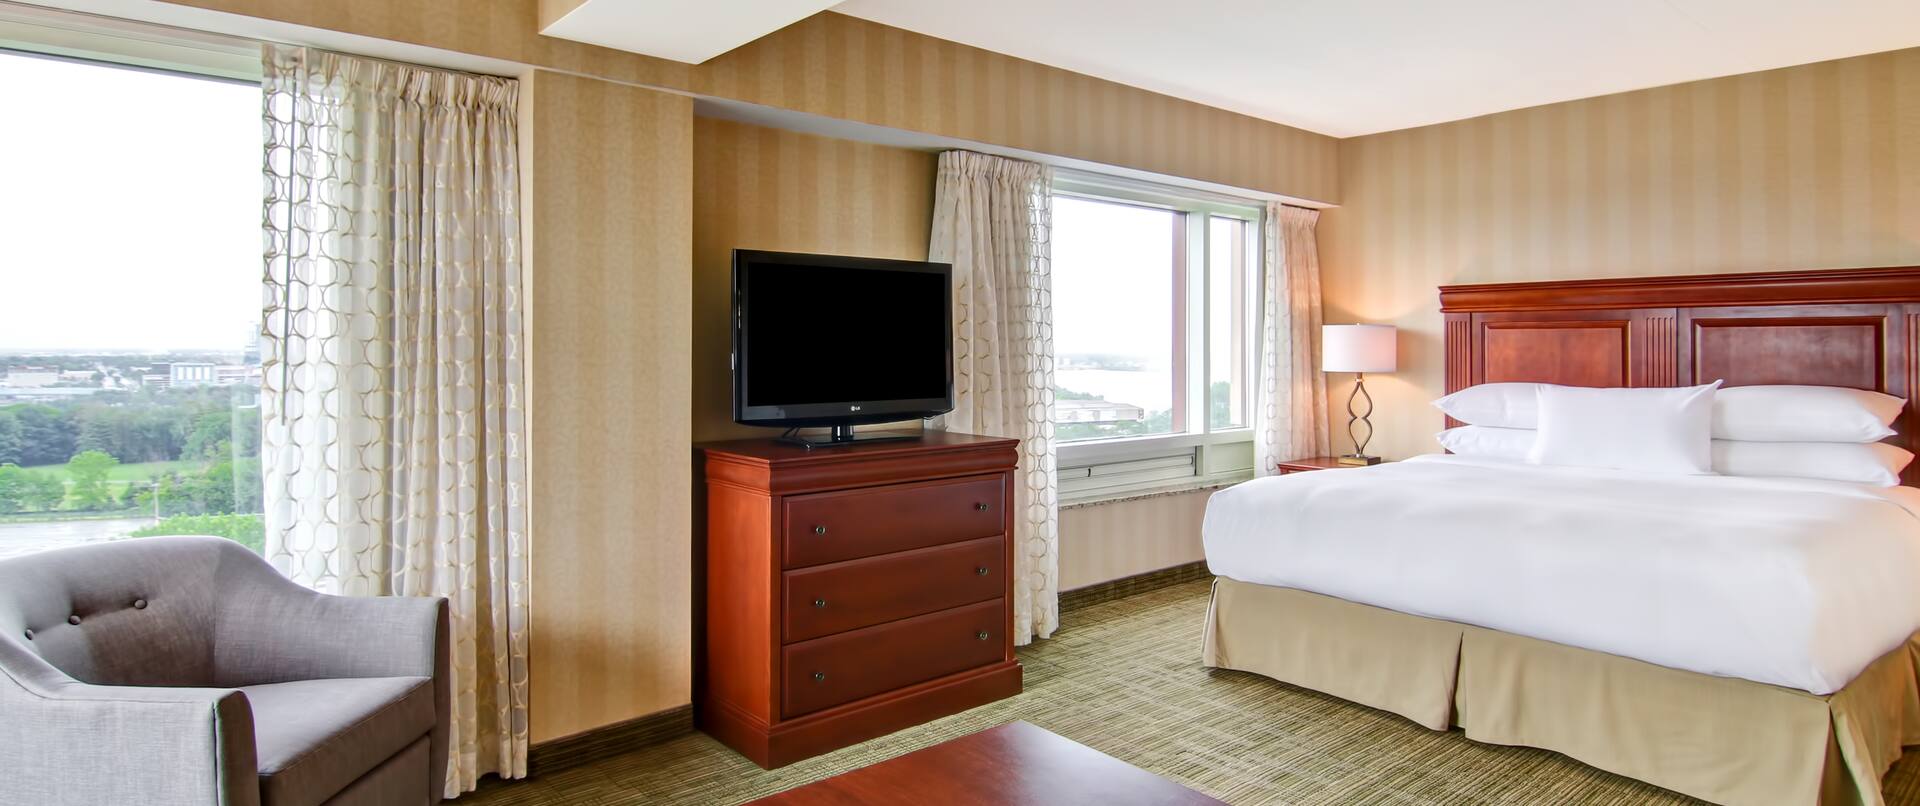 Suite with king bed, work desk, soft chair, TV, and windows with outdoor view